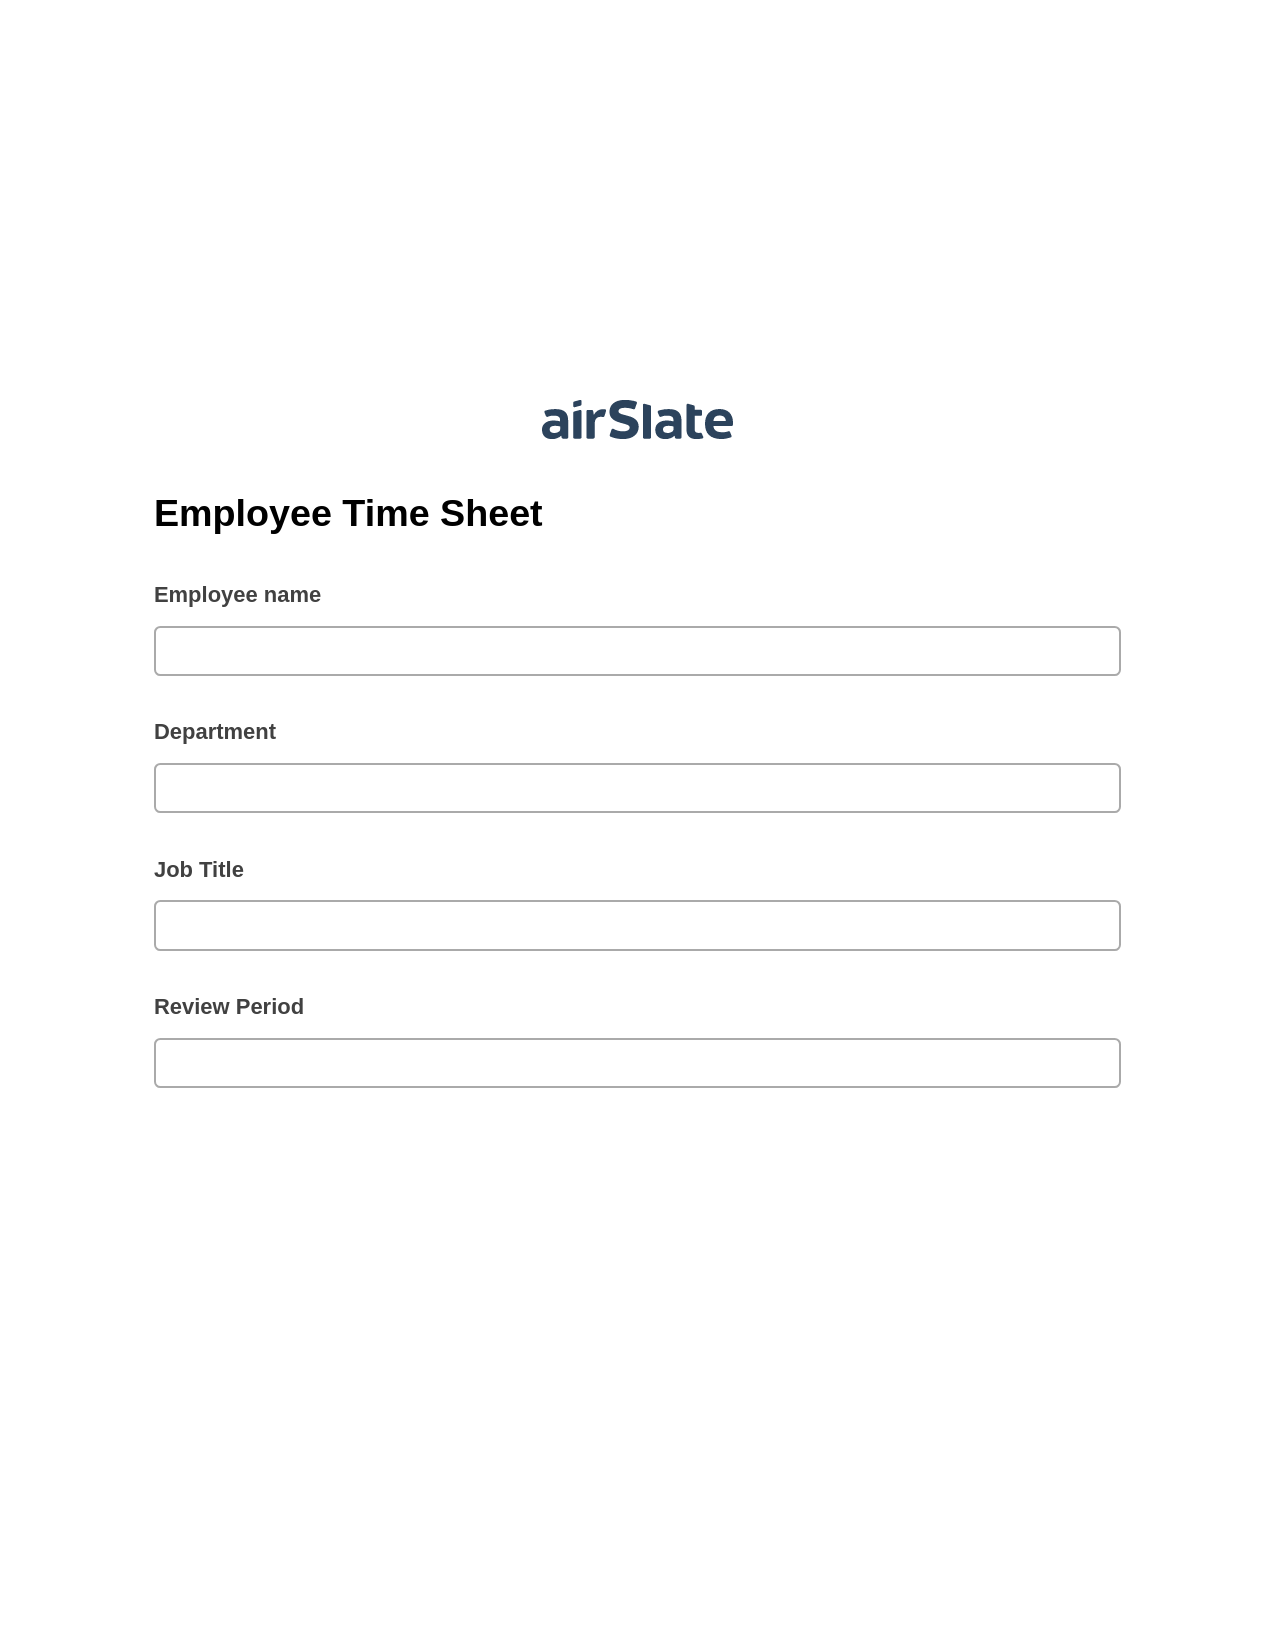 Multirole Employee Time Sheet Pre-fill from Office 365 Excel Bot, Jira Bot, Archive to Dropbox Bot